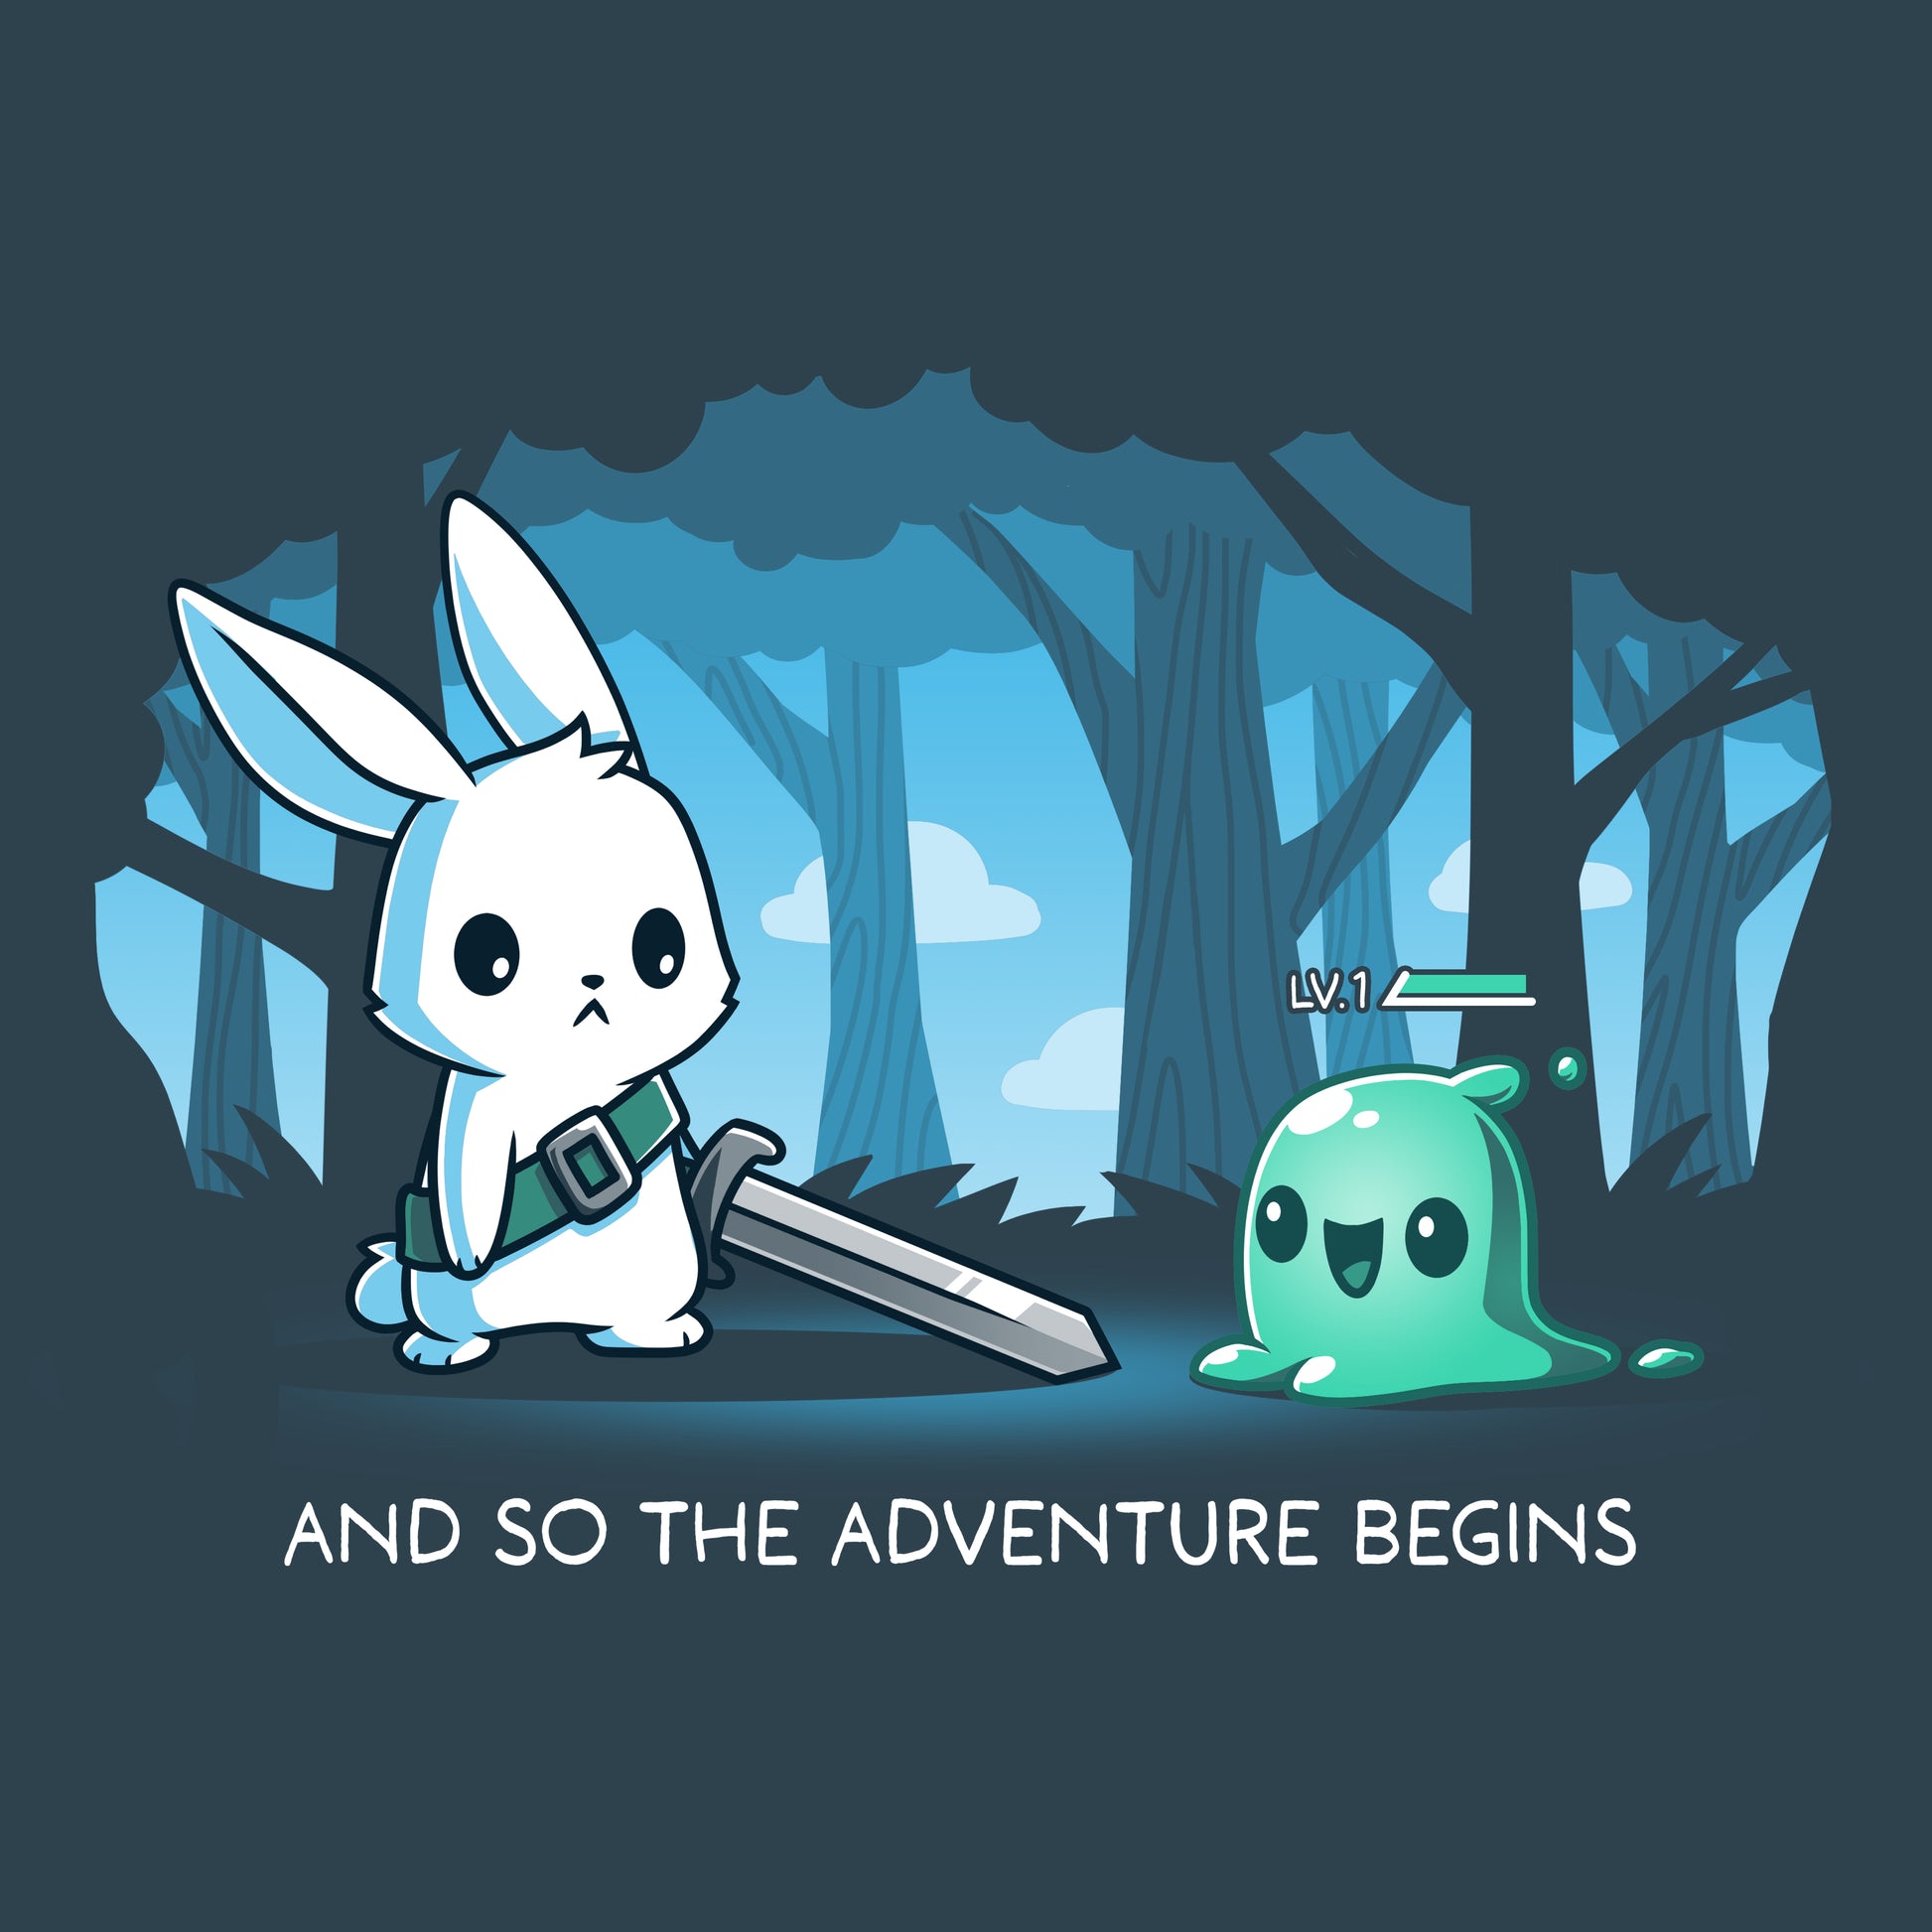 And so The Adventure Begins, with questing at heart. (TeeTurtle)